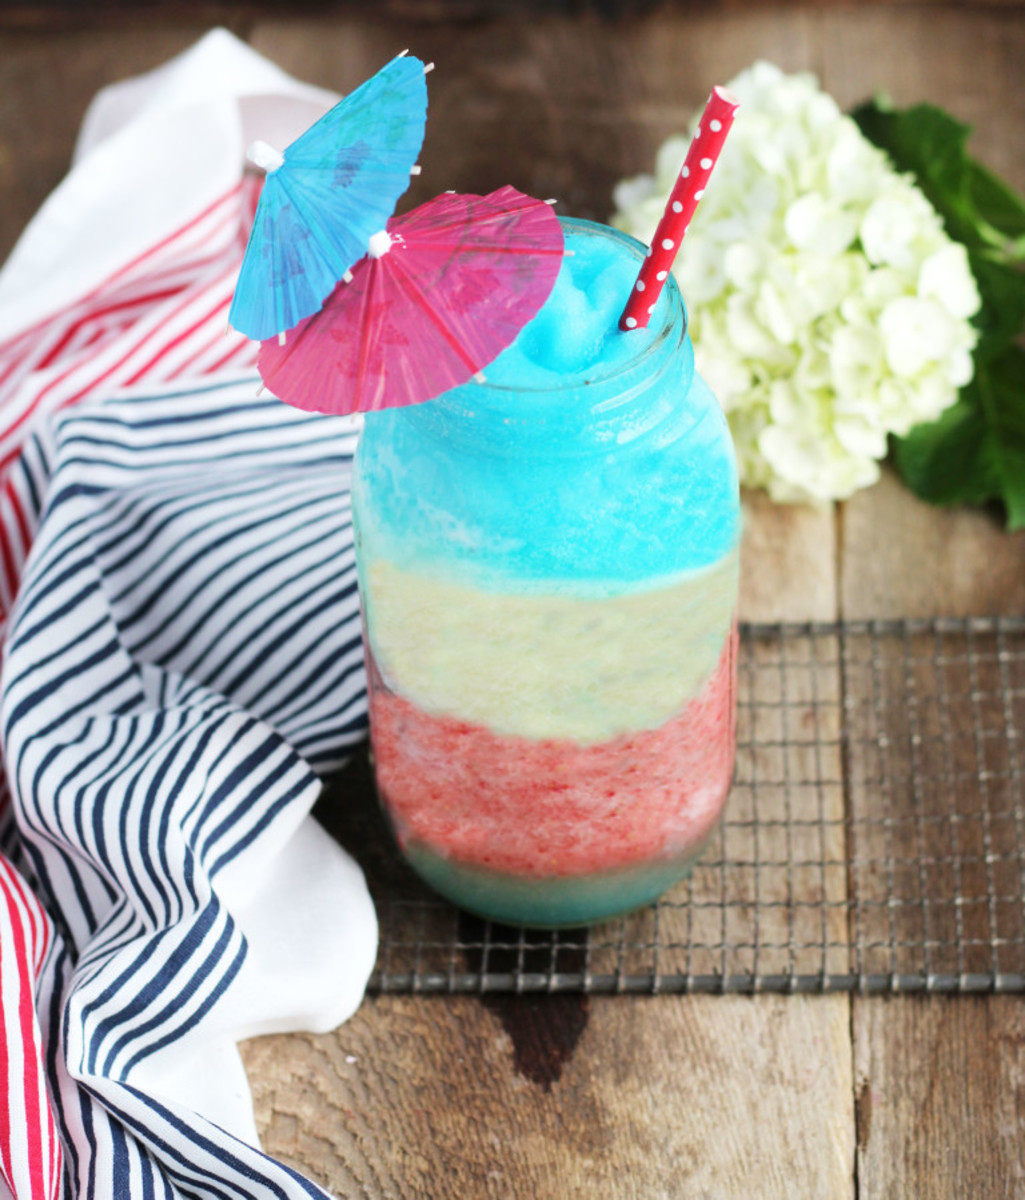 Create a themed cocktail with this yummy red, white and blue coctail